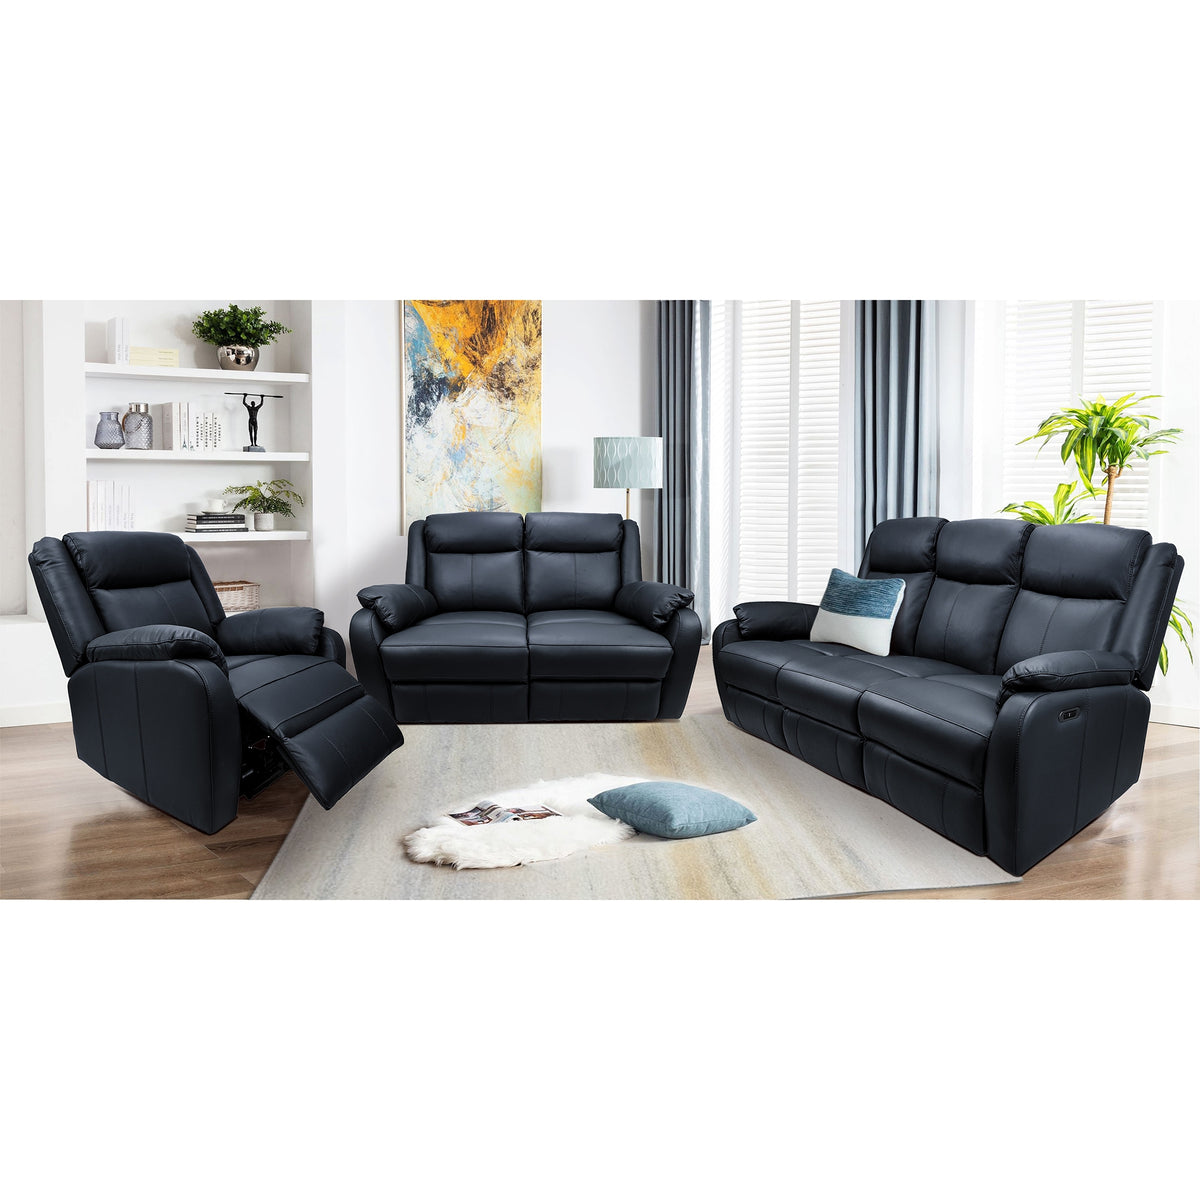 Bella Single Seater Leather Electric Recliner Sofa Lounge Black 